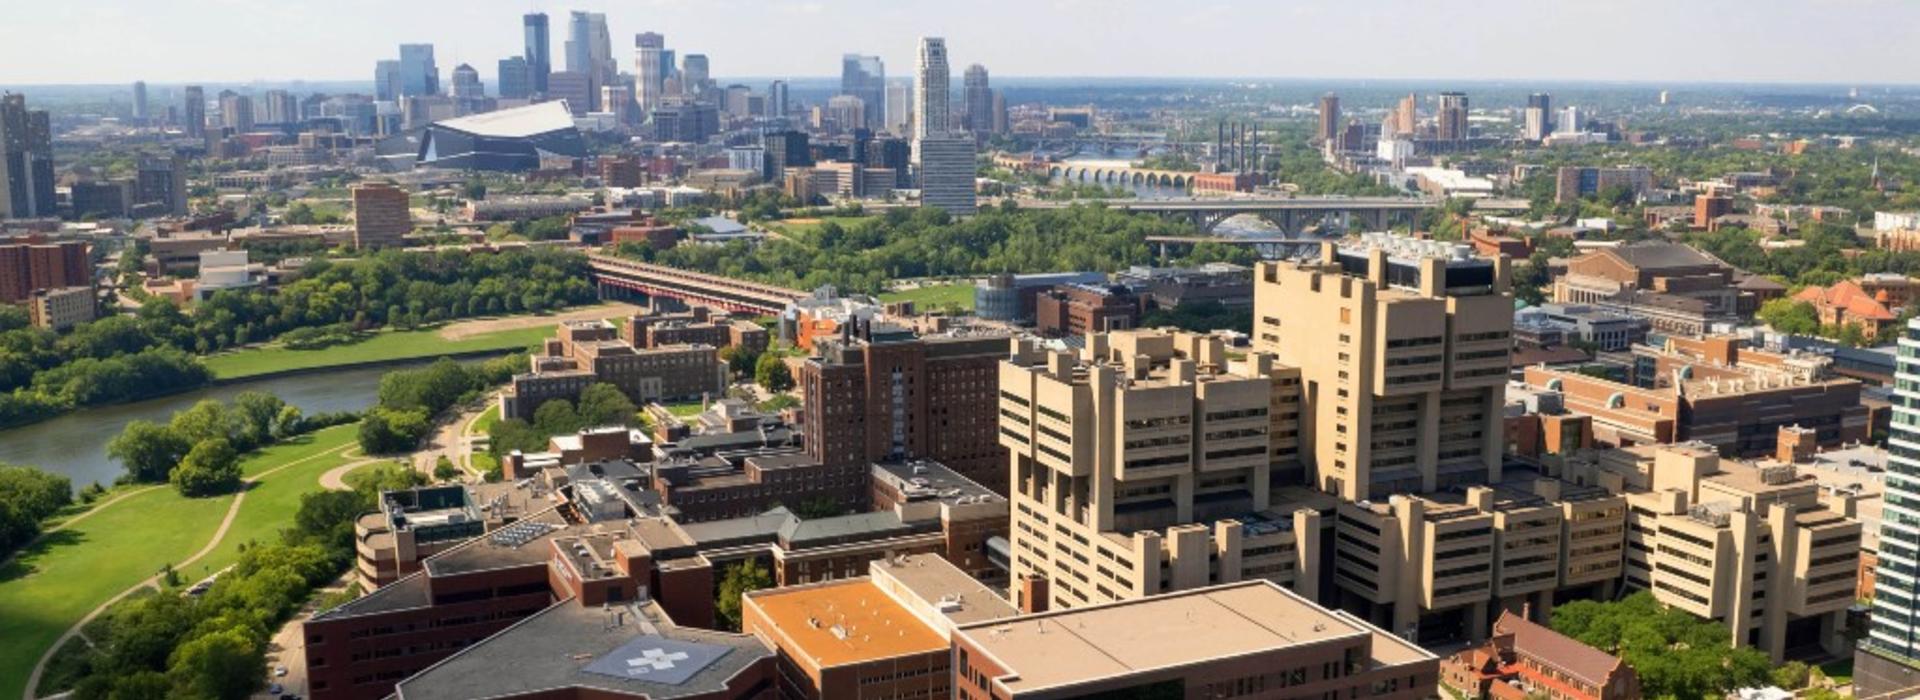 Medical School campus with Minneapolis skyline in the background. 